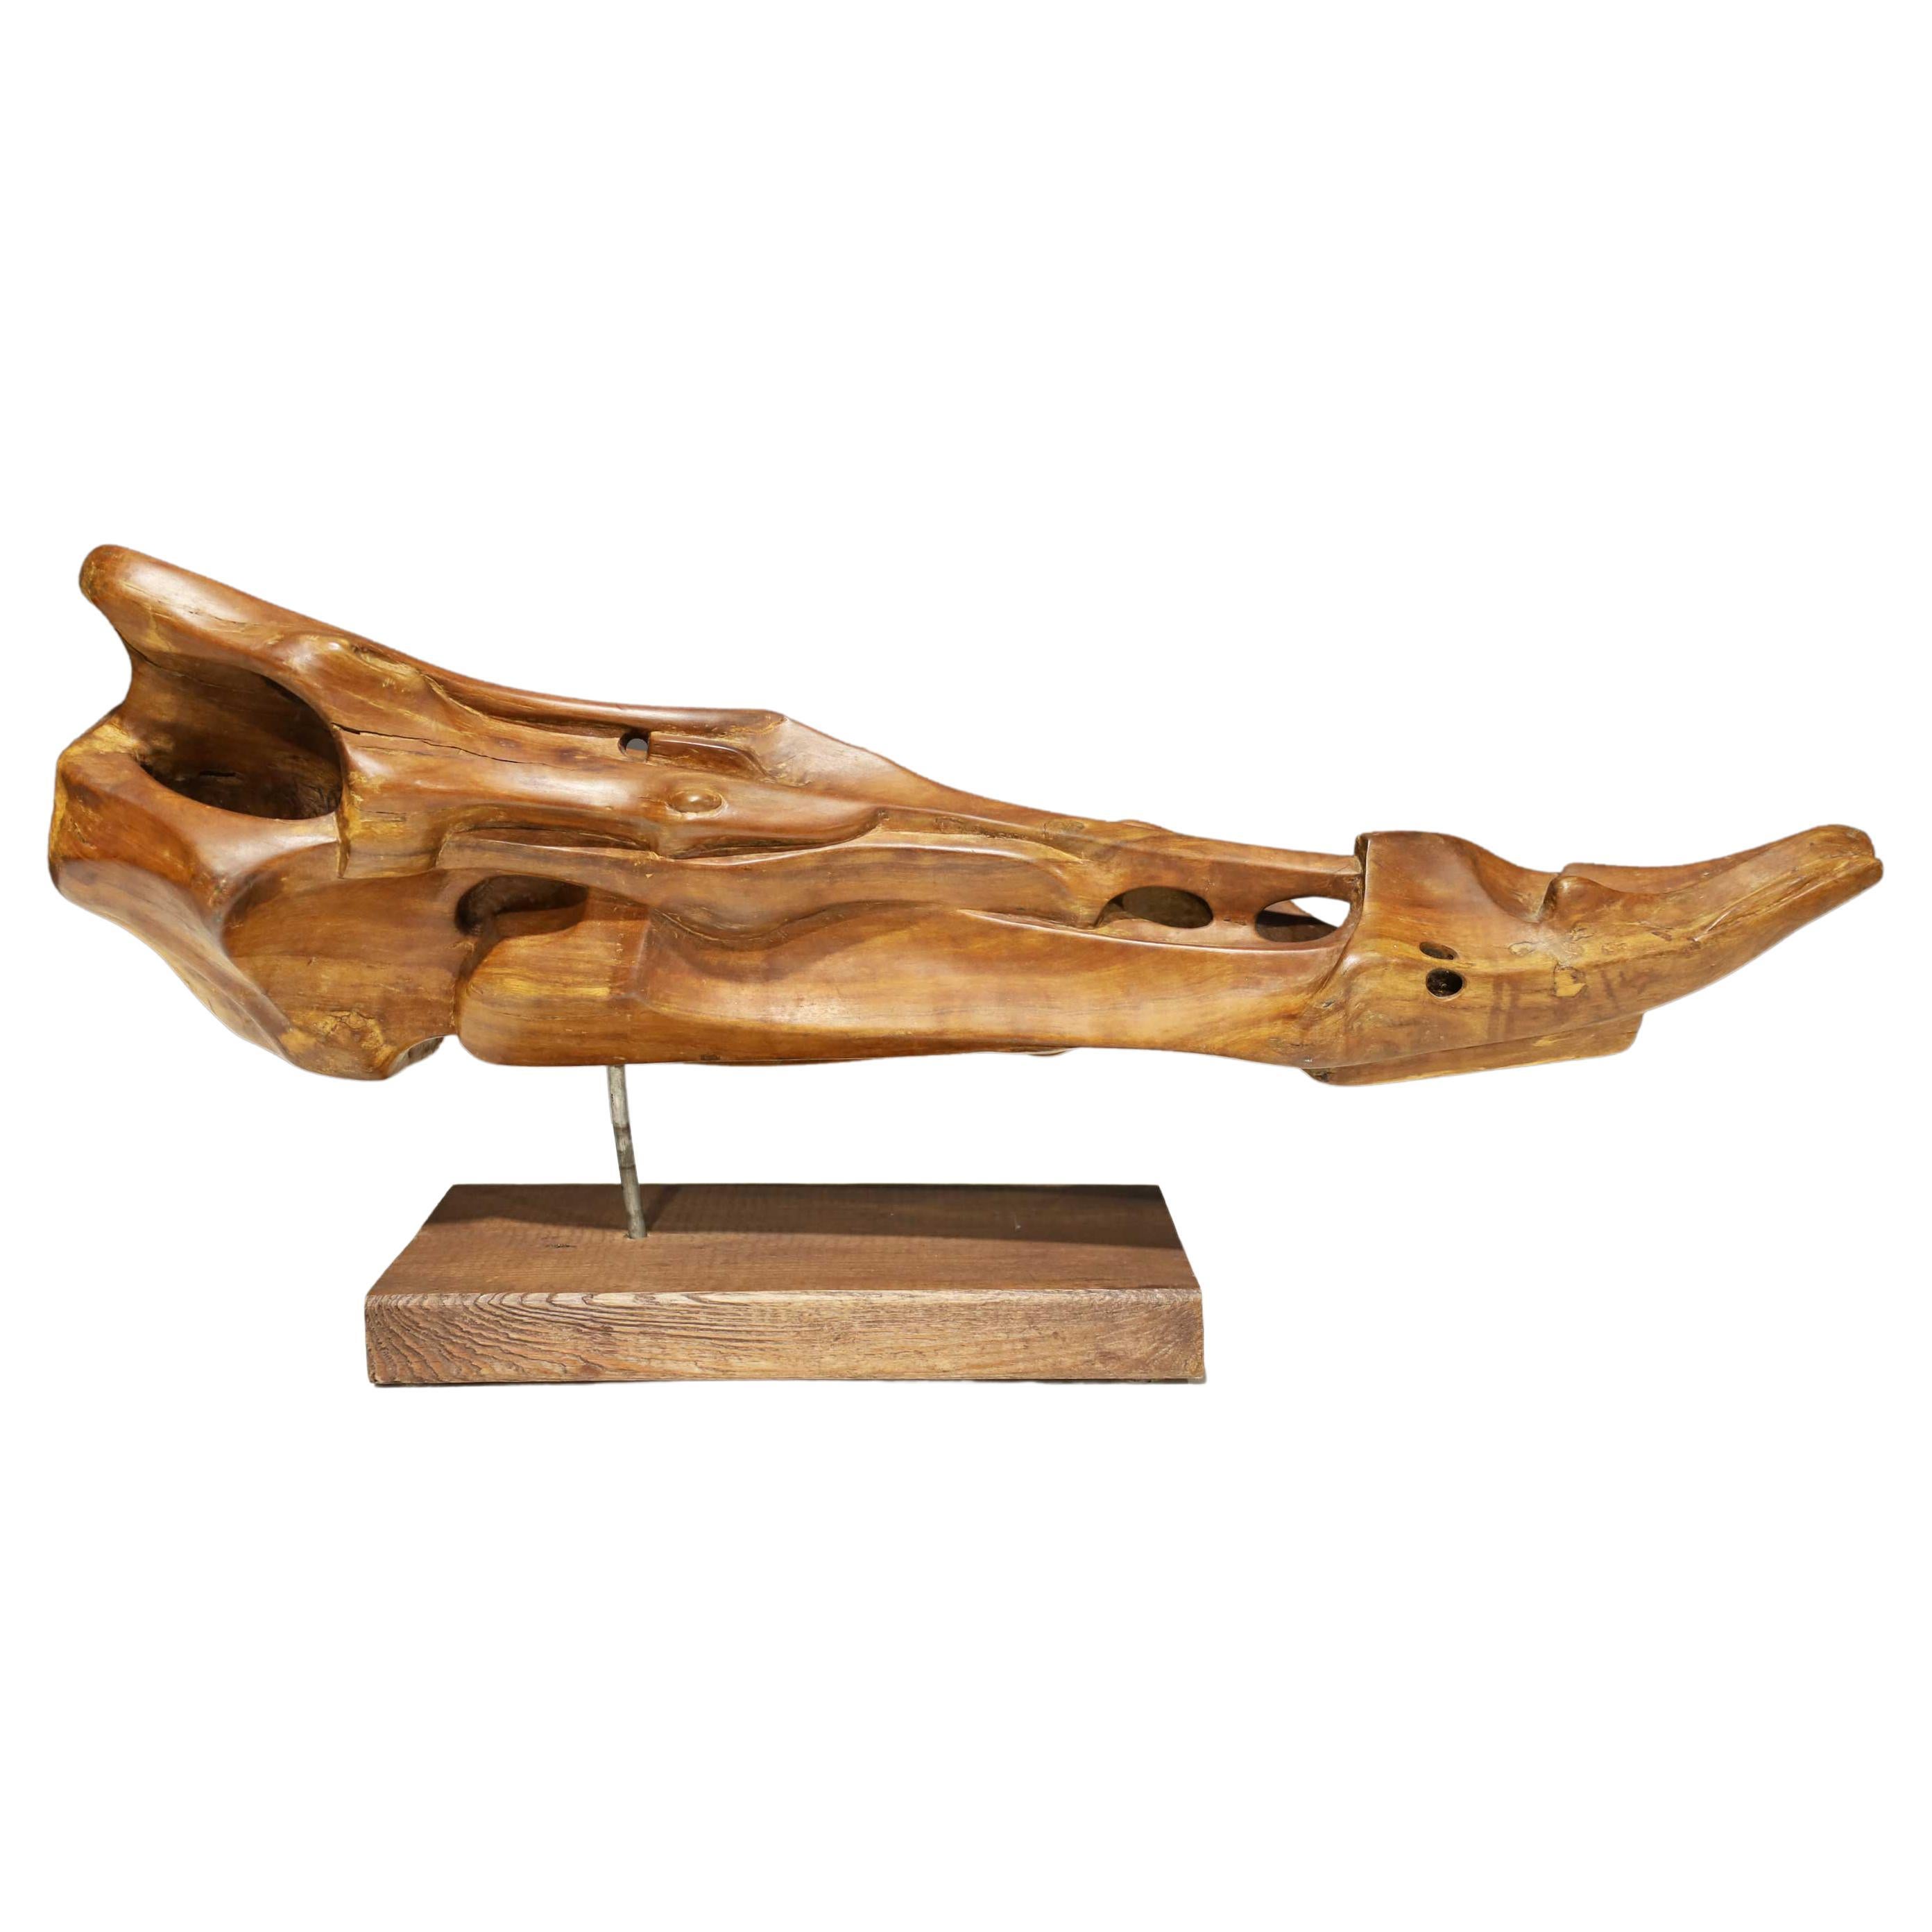 Organic Wood Sculpture Mounted on Base, Signed